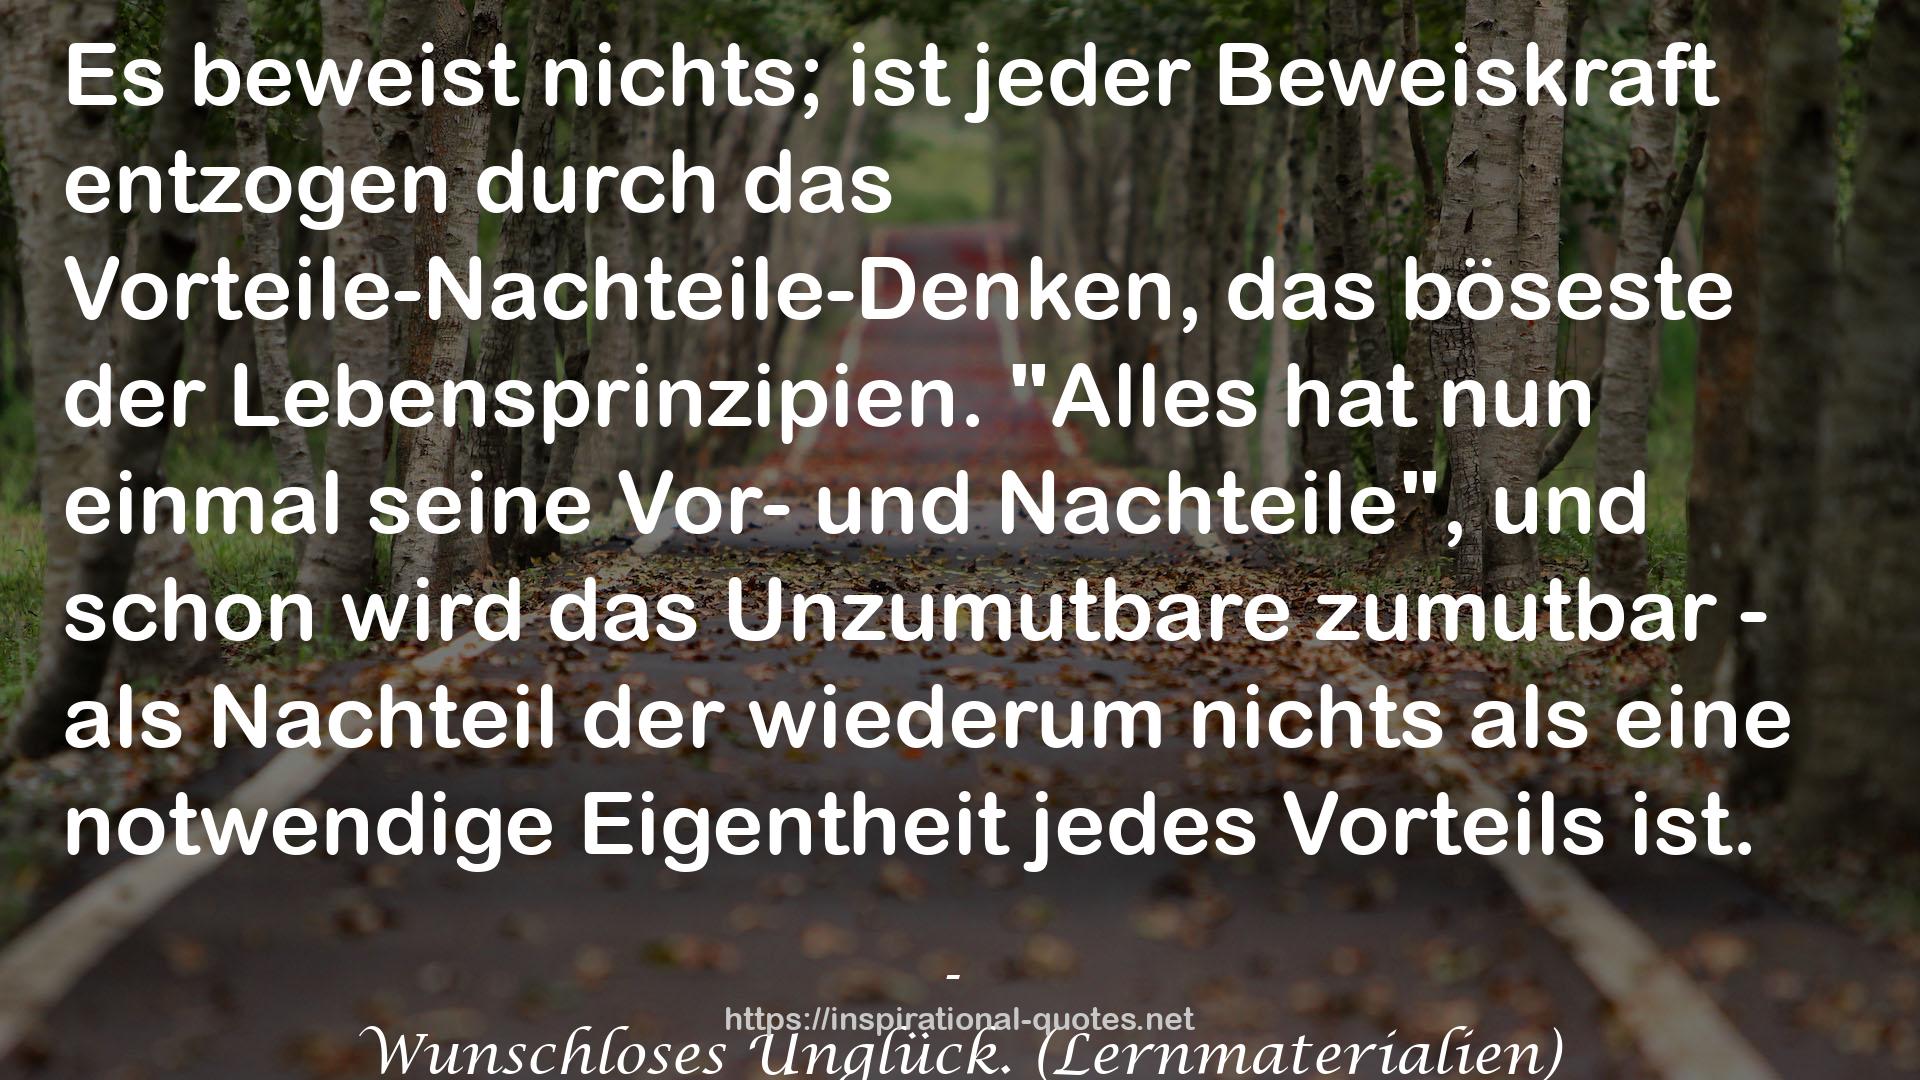 Wunschloses Unglück. (Lernmaterialien) QUOTES